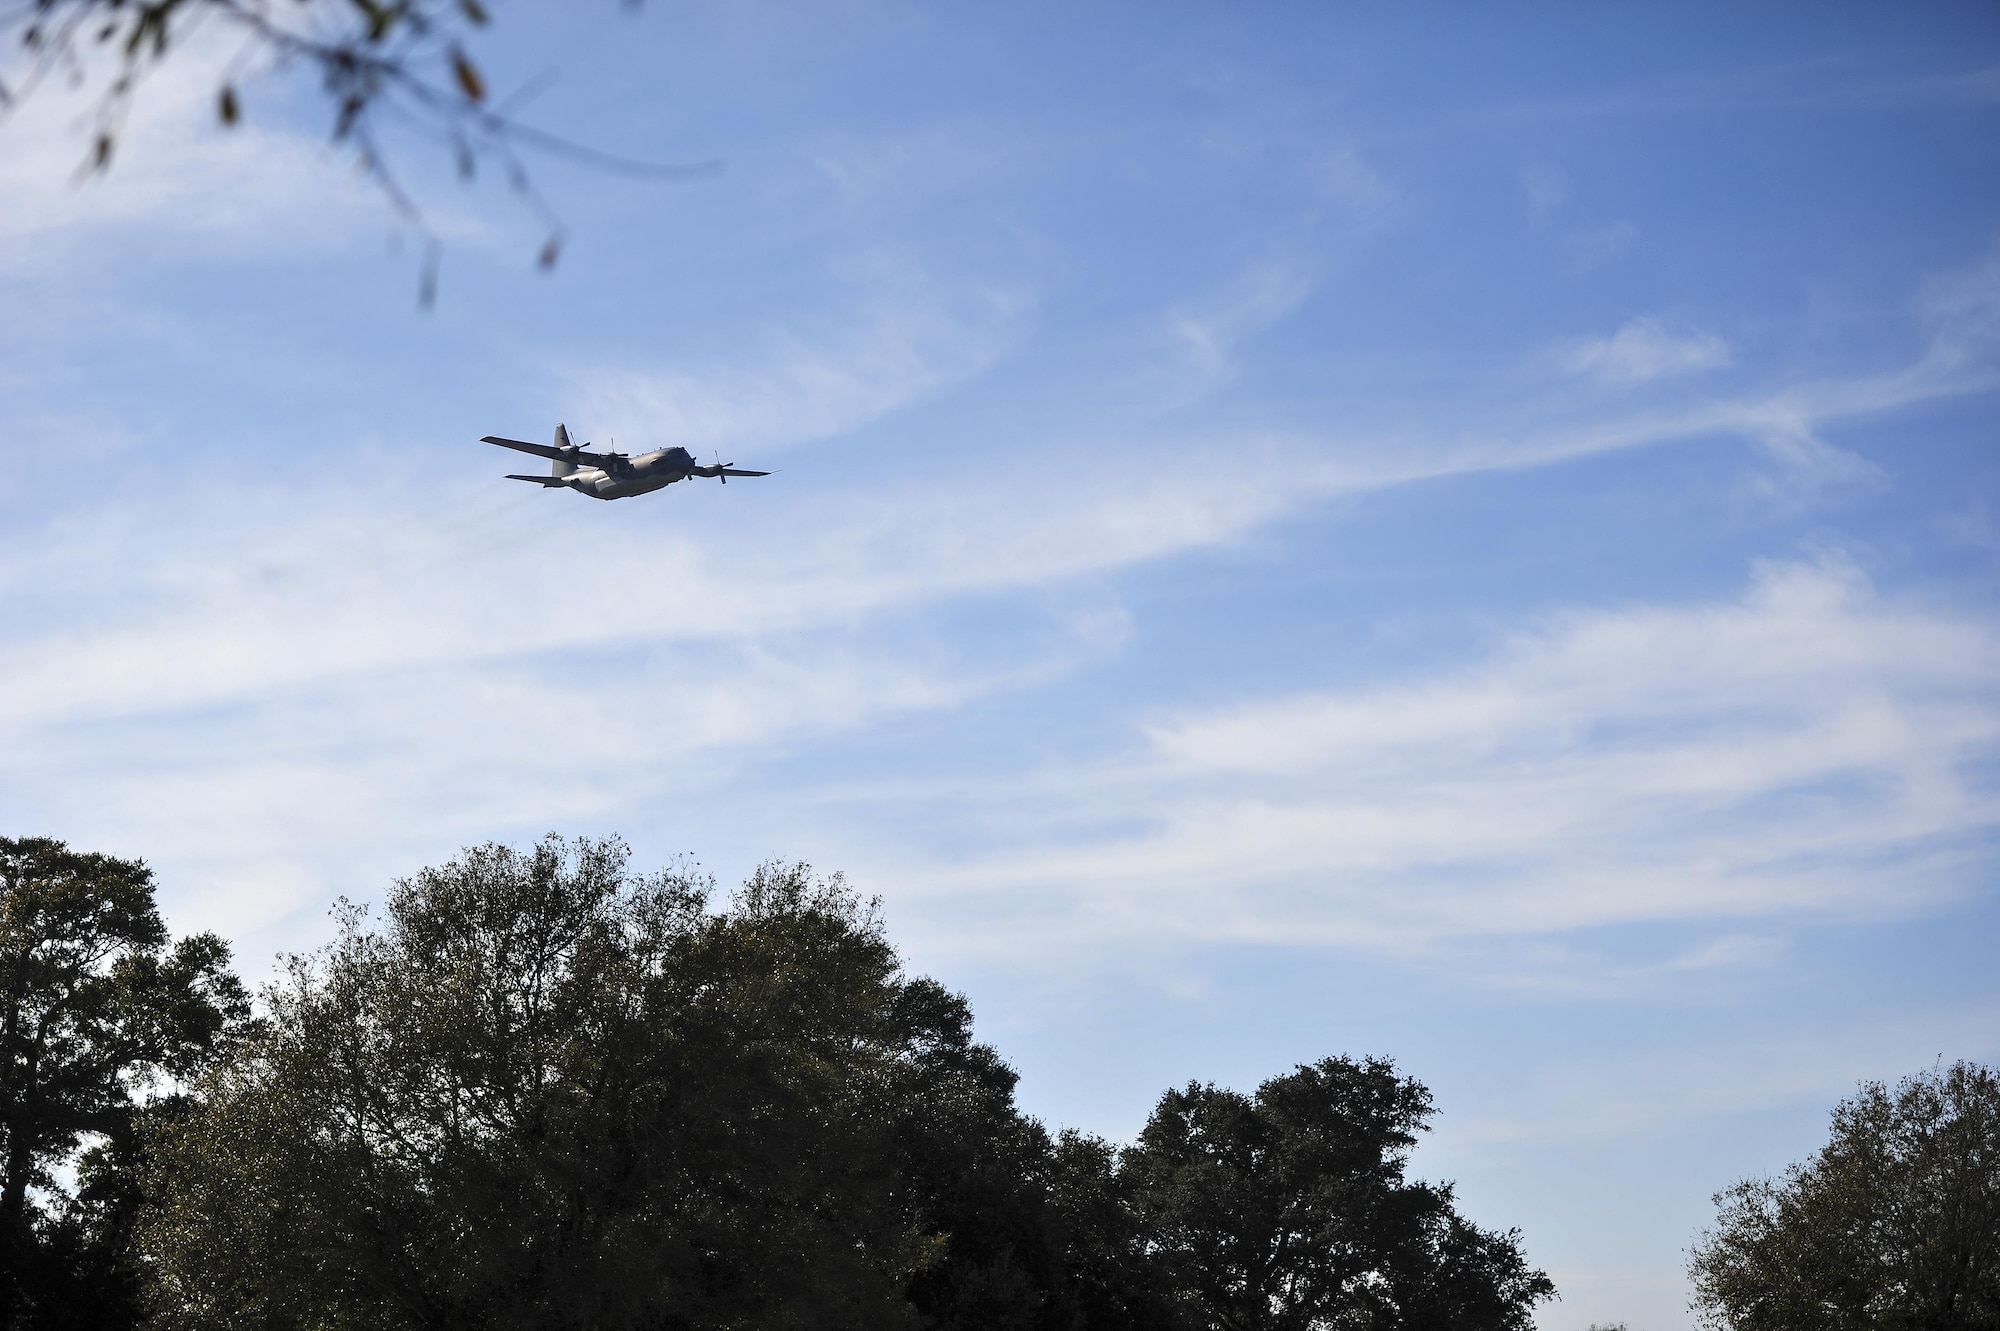 A soon-to-be retired AC-130H Spectre makes a final flyover during a remembrance ceremony at Barrancas National Cemetery on Naval Air Station Pensacola, Fla., Jan. 31, 2015. The AC-130H Spectre’s primary missions are close air support, air interdiction and armed reconnaissance. (U.S. Air Force photo/Airman 1st Class Jeff Parkinson)